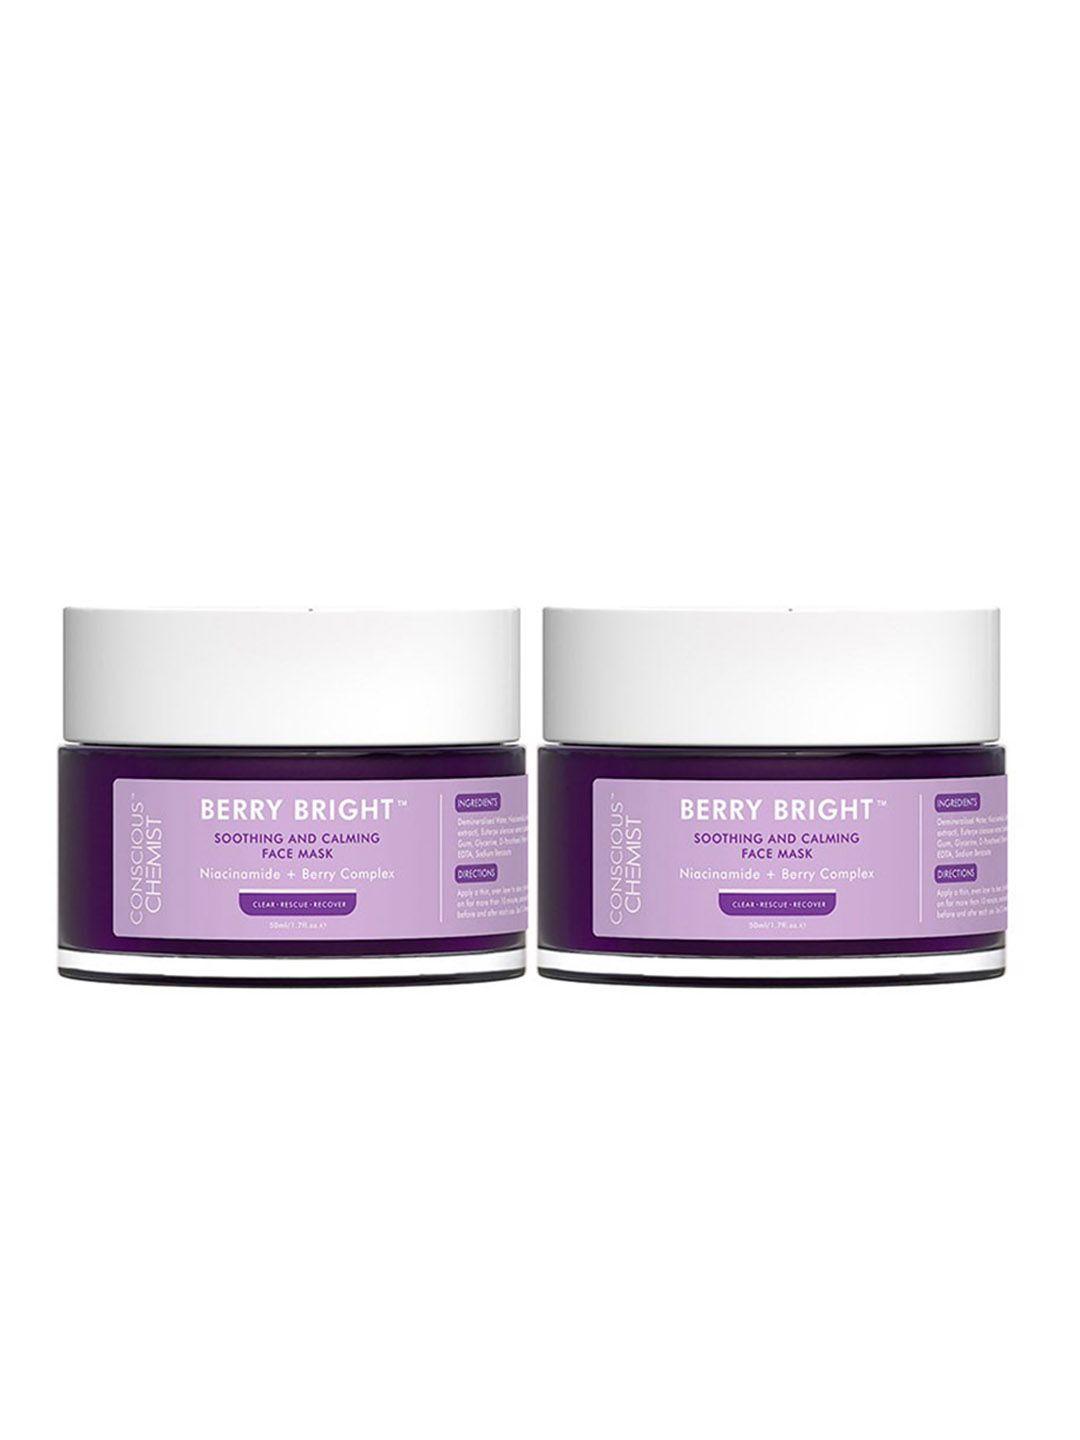 conscious chemist pore refining face mask with niacinamide & berry extracts pack of 2